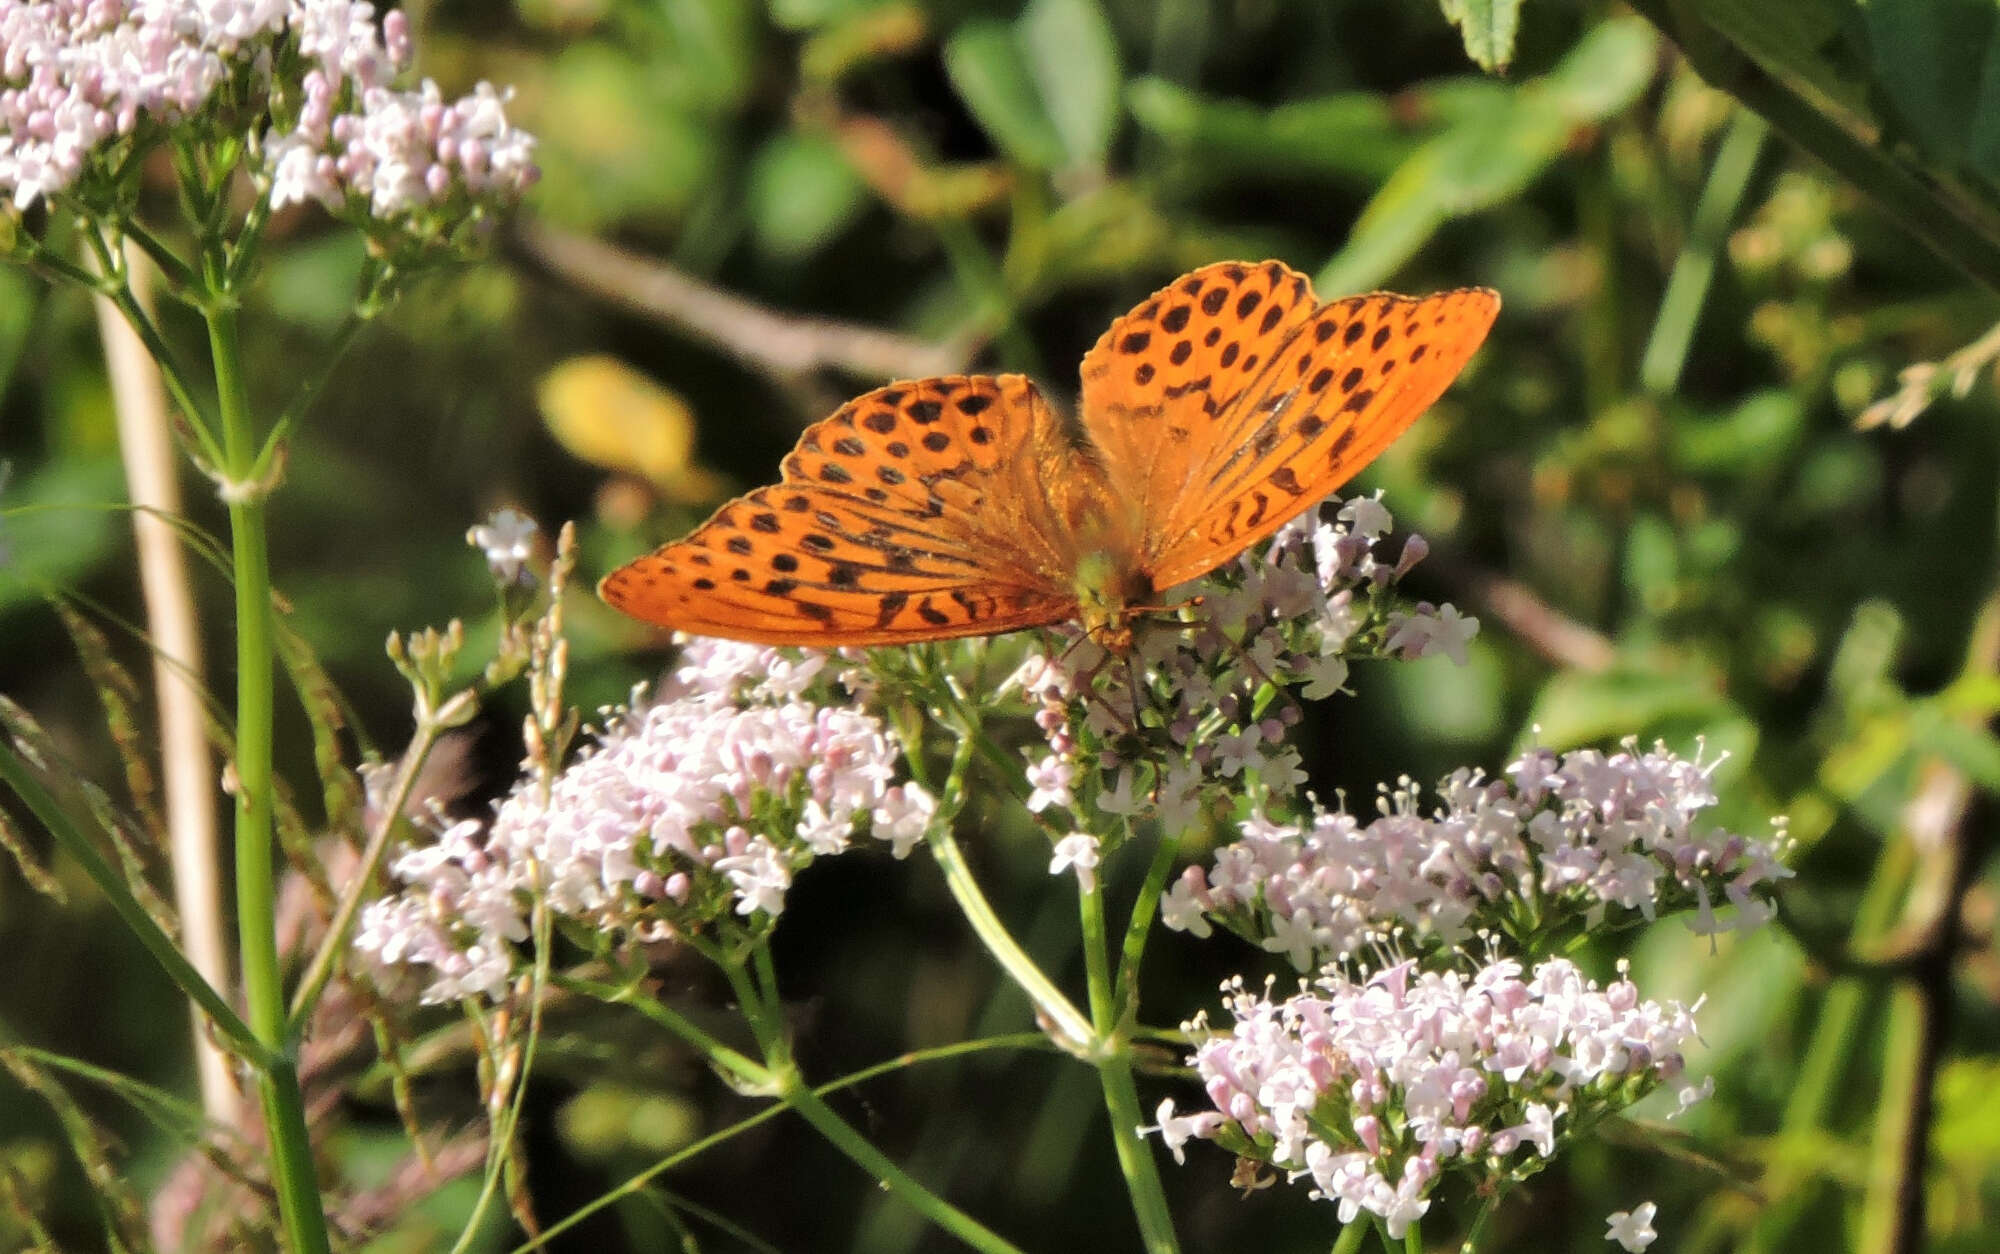 By 2018 the Silver-washed Fritillary was making major advances throughout the Lincolnshire woodlands - 3 were seen in our garden!